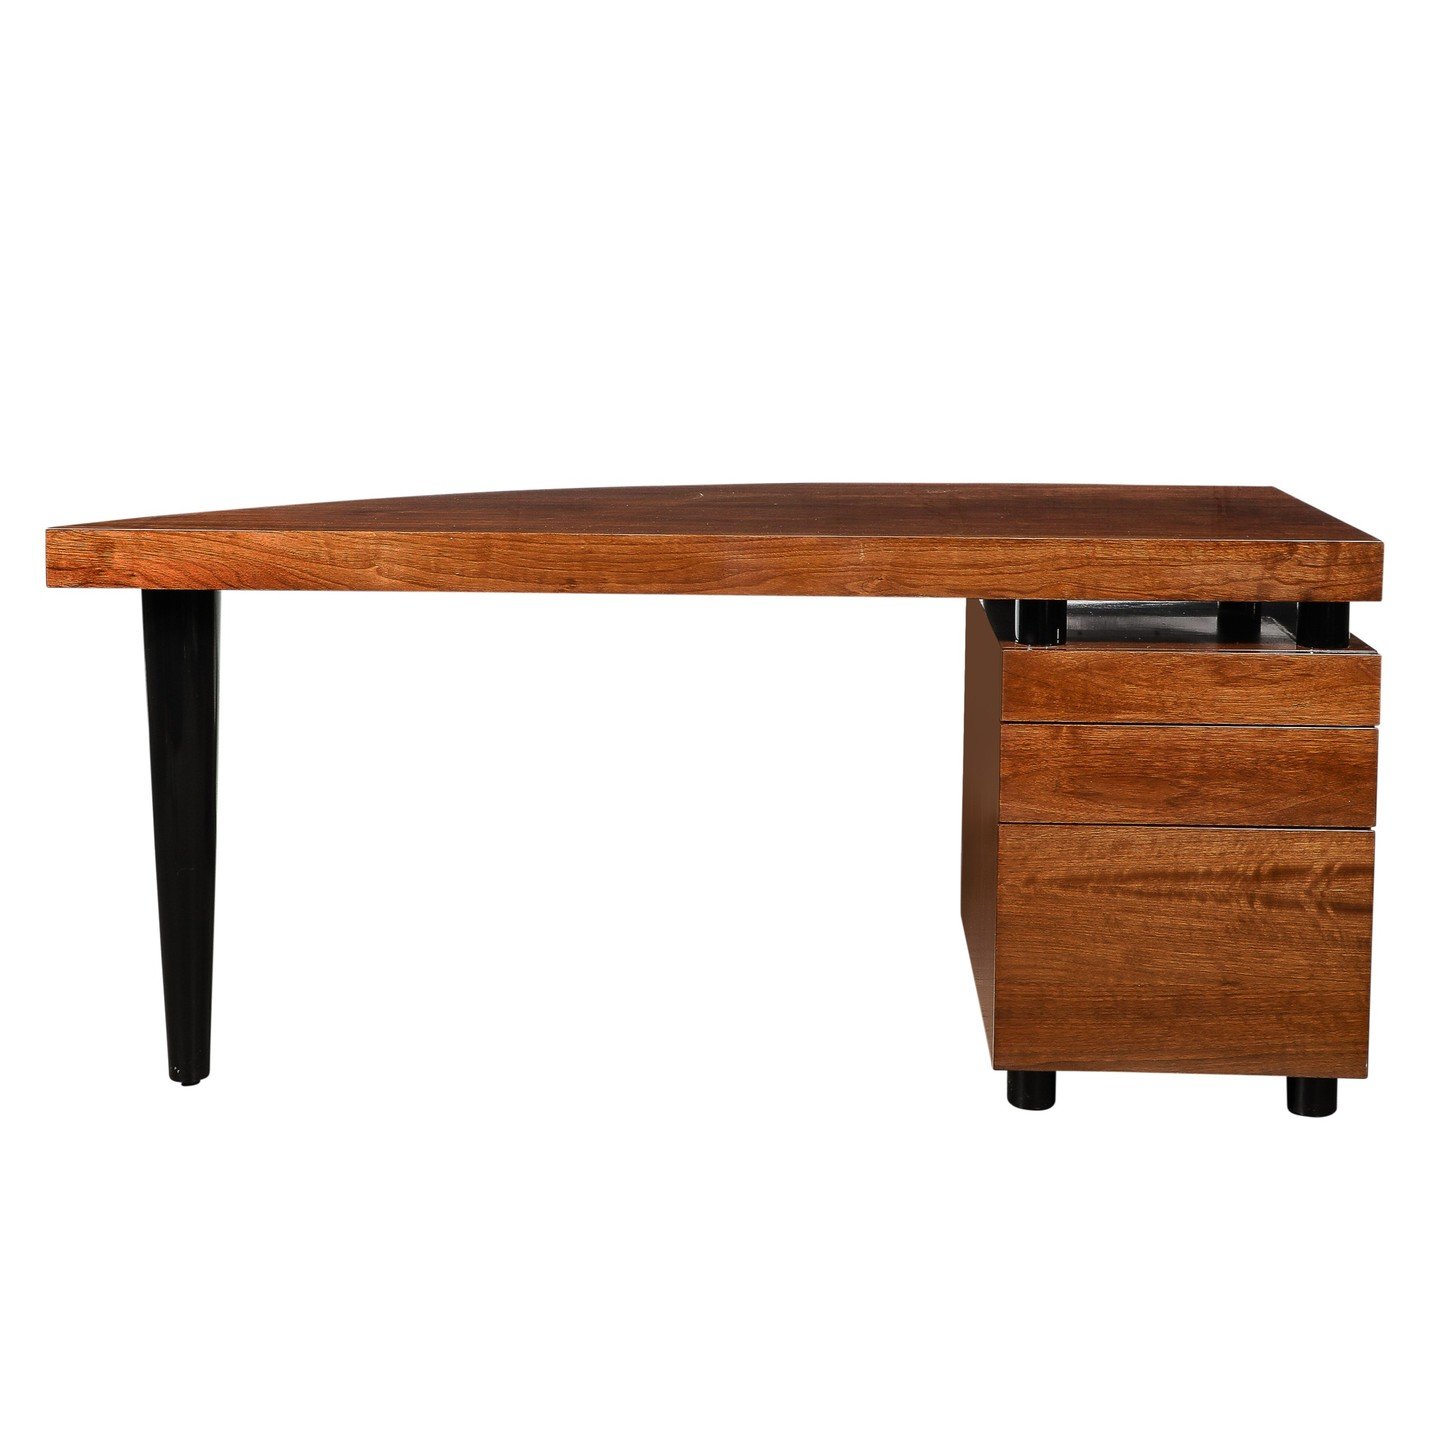 Mid-Century Bookmatched Walnut W/ Tapered Leg Boca Desk by Leon Rosen for Pace

This unique and brilliantly proportioned Mid-Century Modernist Boca Desk in Bookmatched Walnut W/ Tapered Black Lacquer Support is by Leon Rosen for Pace and originates f